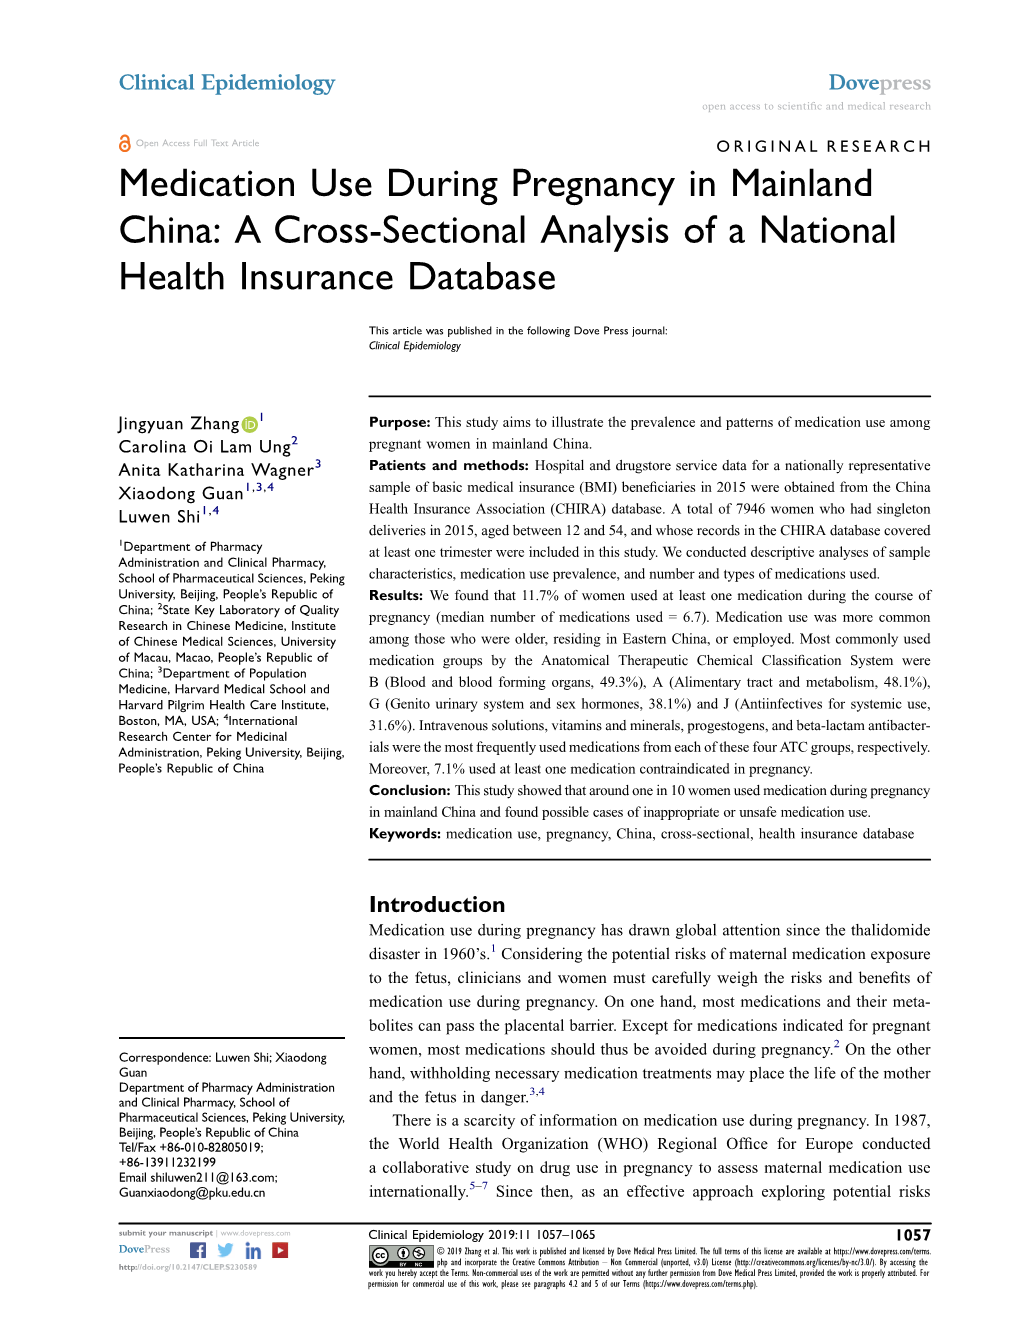 Medication Use During Pregnancy in Mainland China: a Cross-Sectional Analysis of a National Health Insurance Database